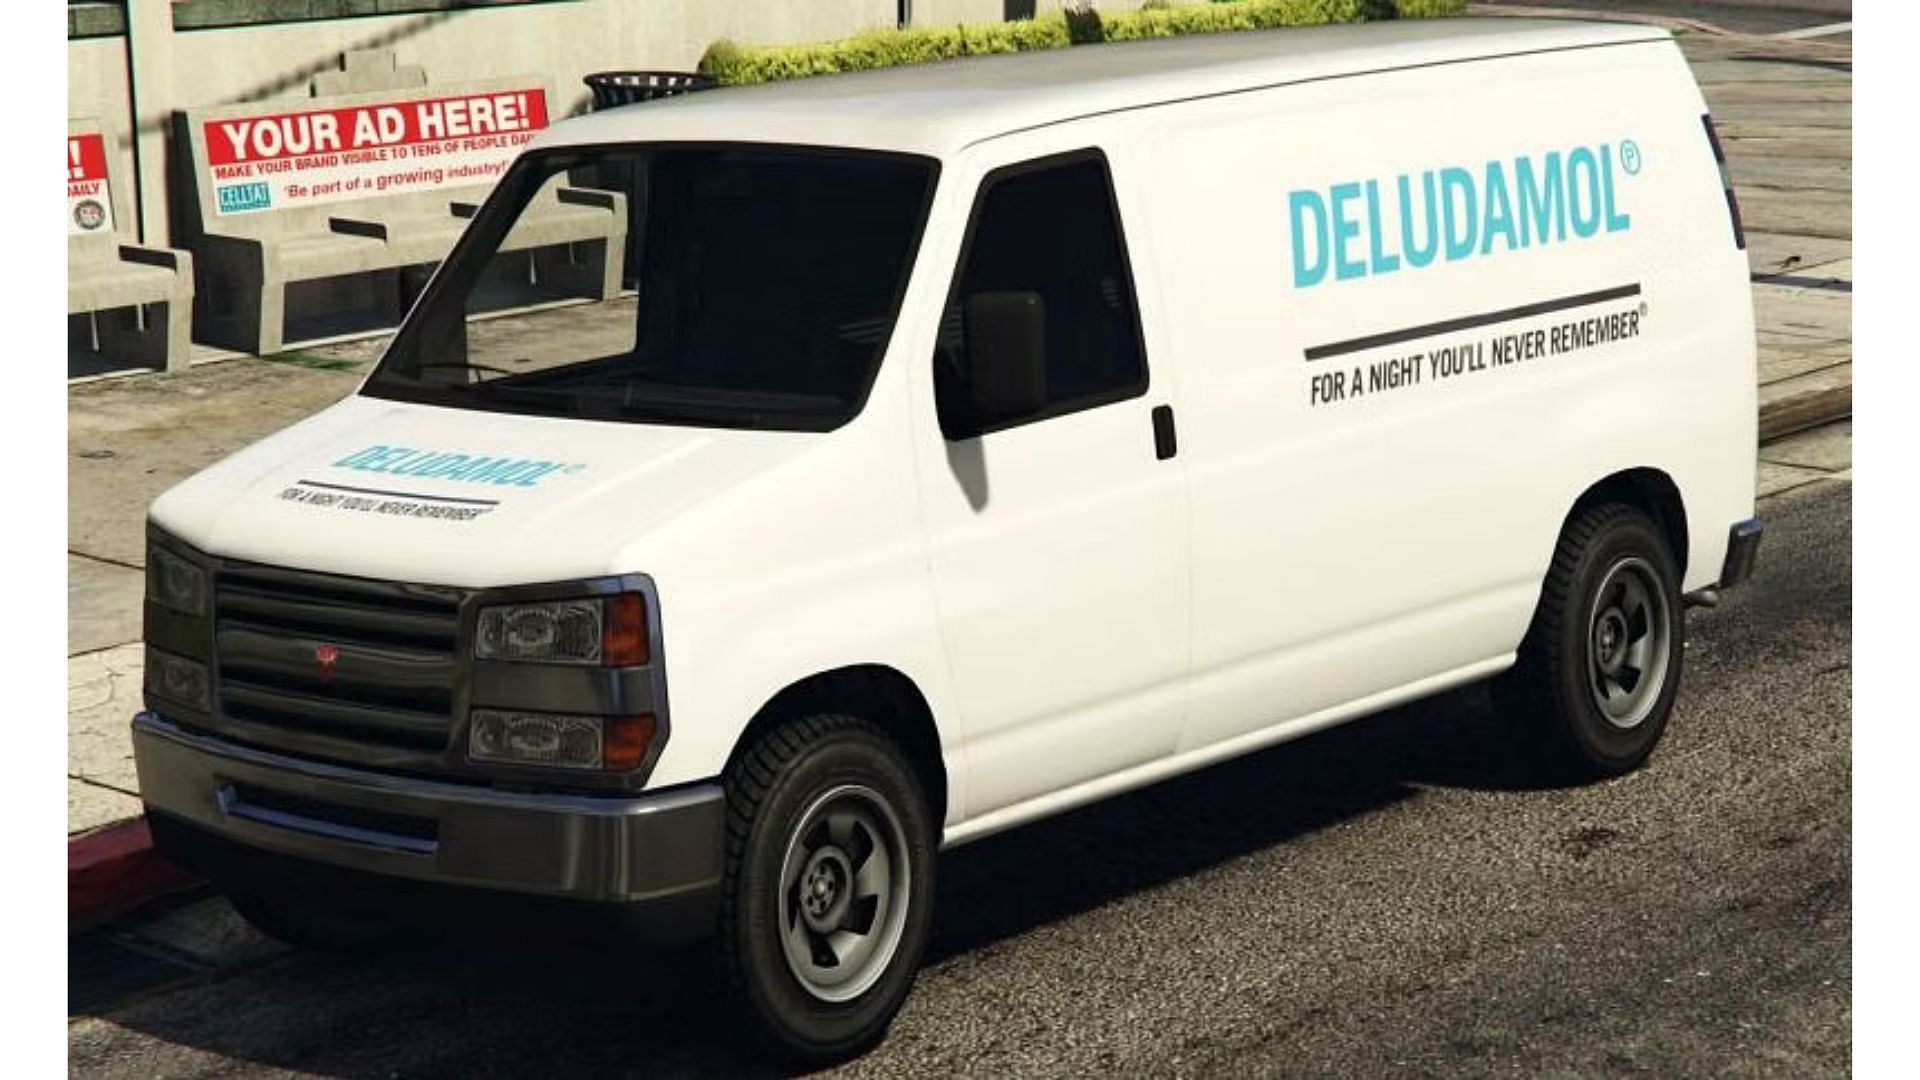 Where to find a Deludamol van in GTA 5